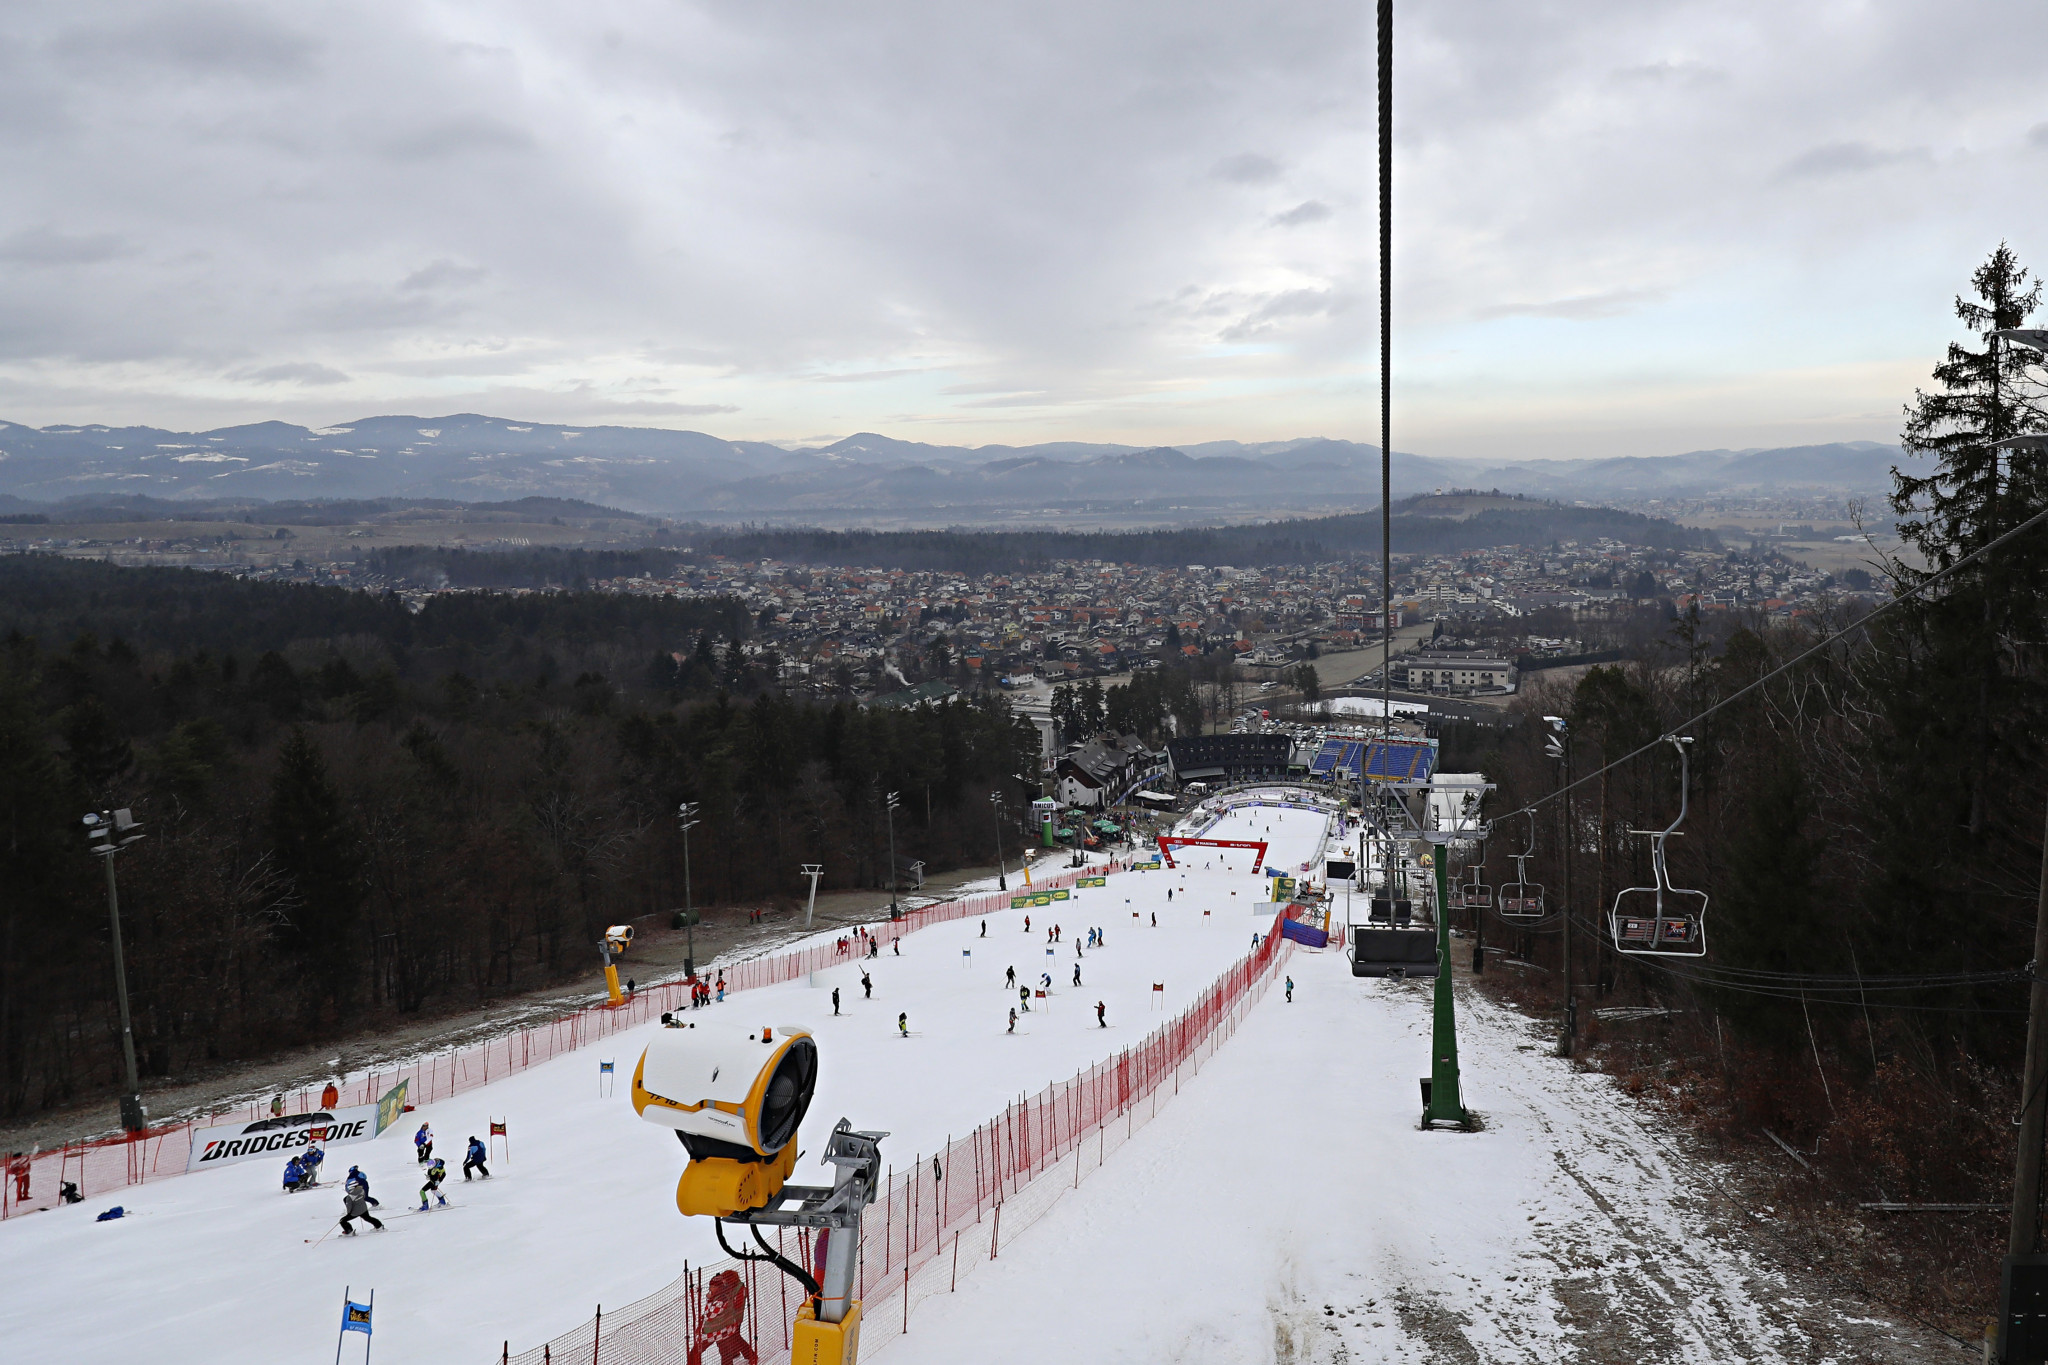 Maribor's FIS Alpine Ski World Cup leg had to be moved due to warm weather in February ©Getty Images